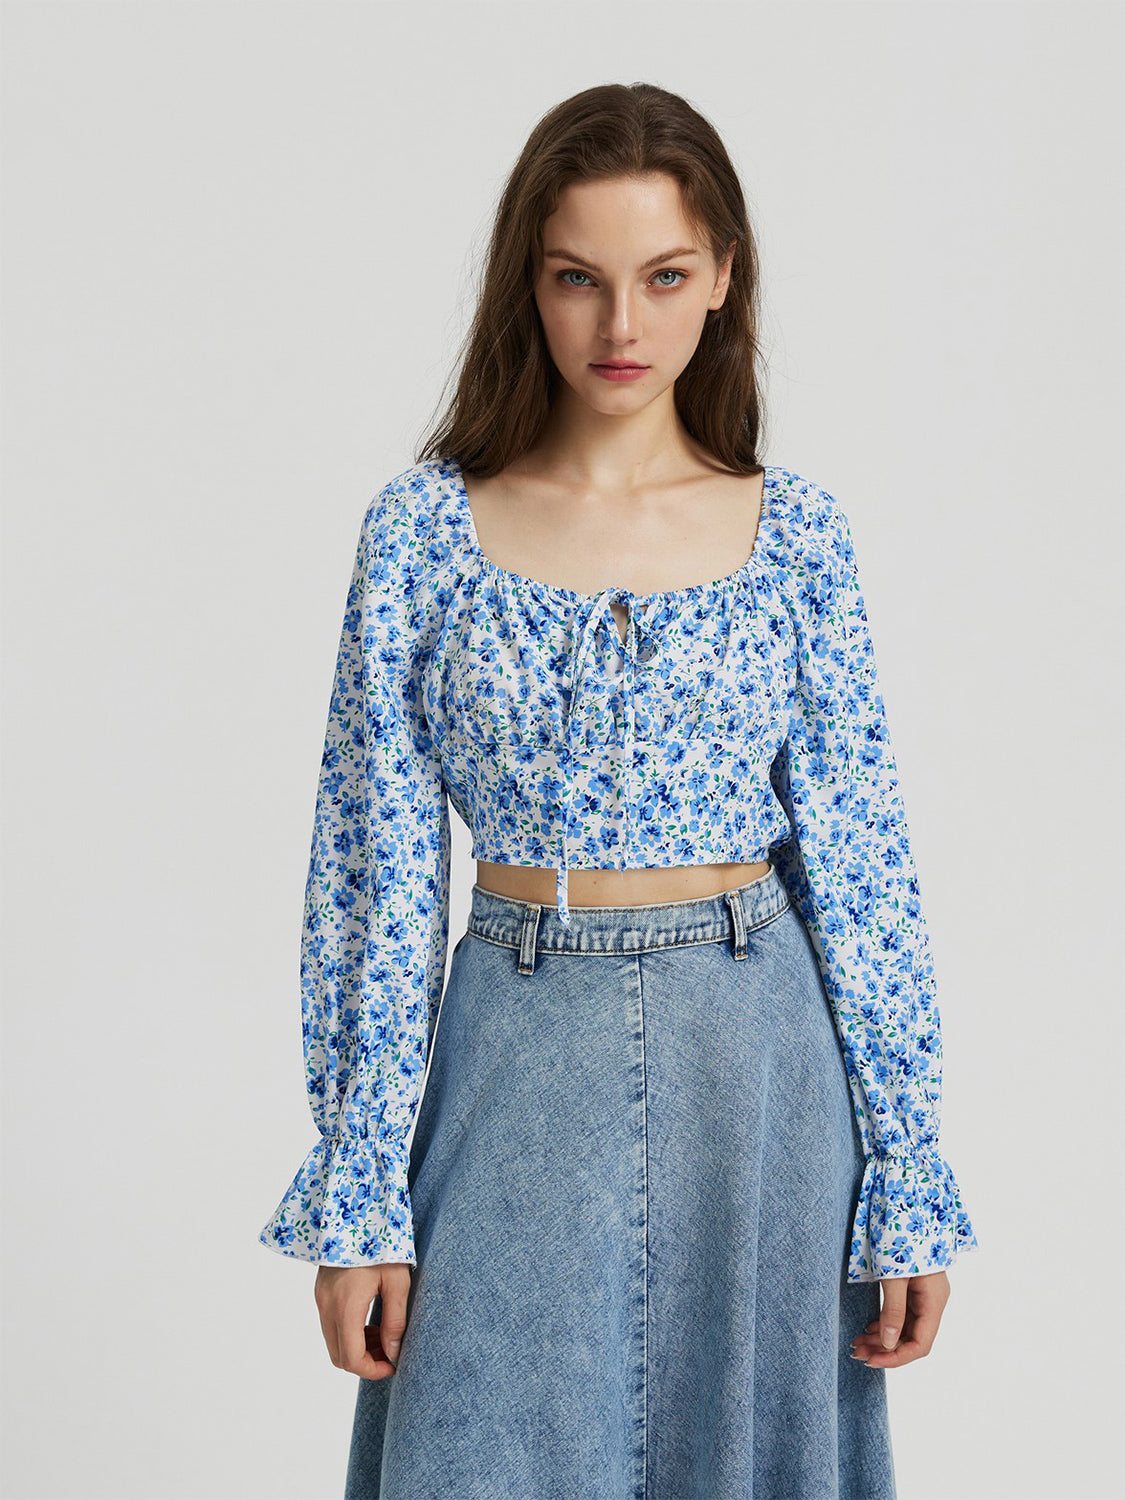 Floral Tie Front Square Neck Flounce Sleeve Blouse - Sky Blue / S - Women’s Clothing & Accessories - Shirts & Tops